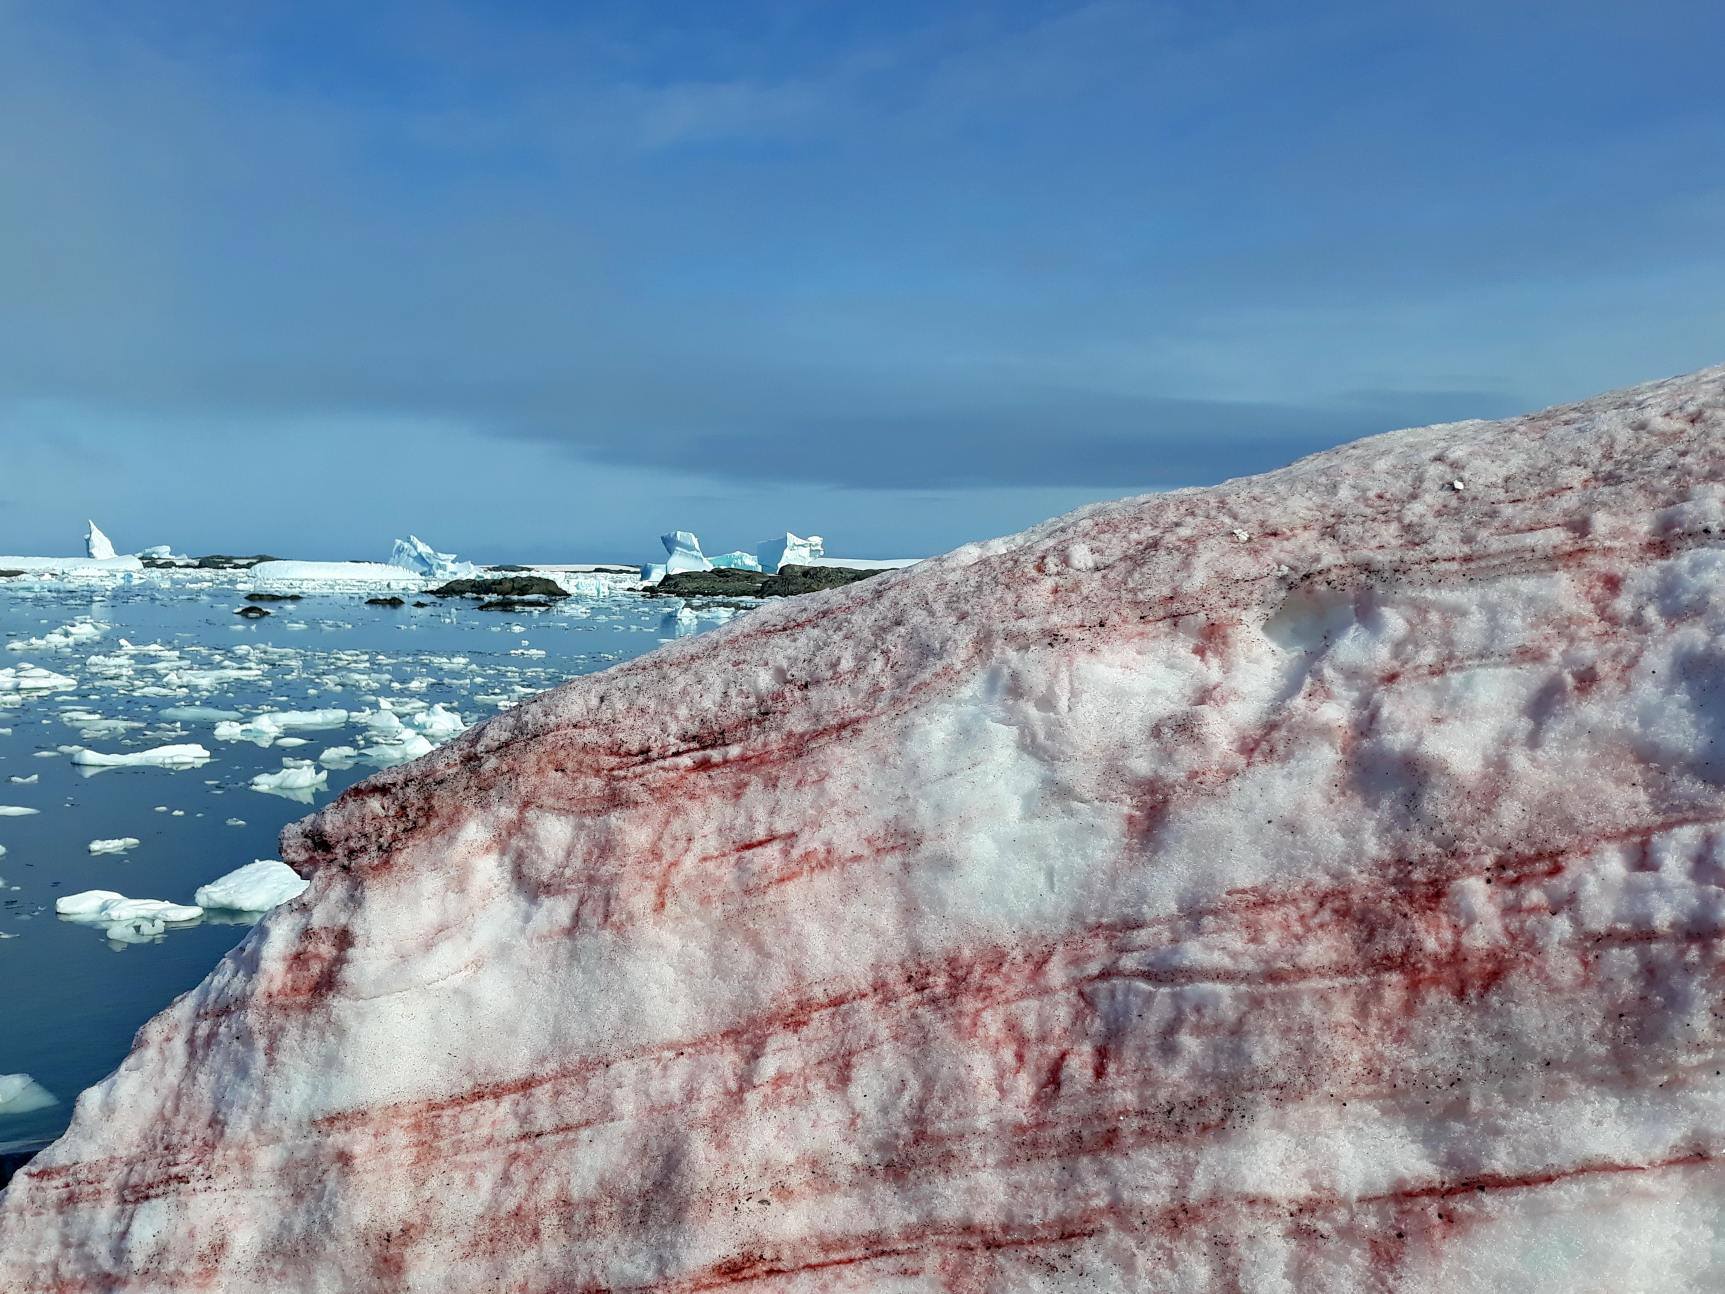 A cliff of ice with layers of bright red stained throughout. Ice covered ocean is visible behind.